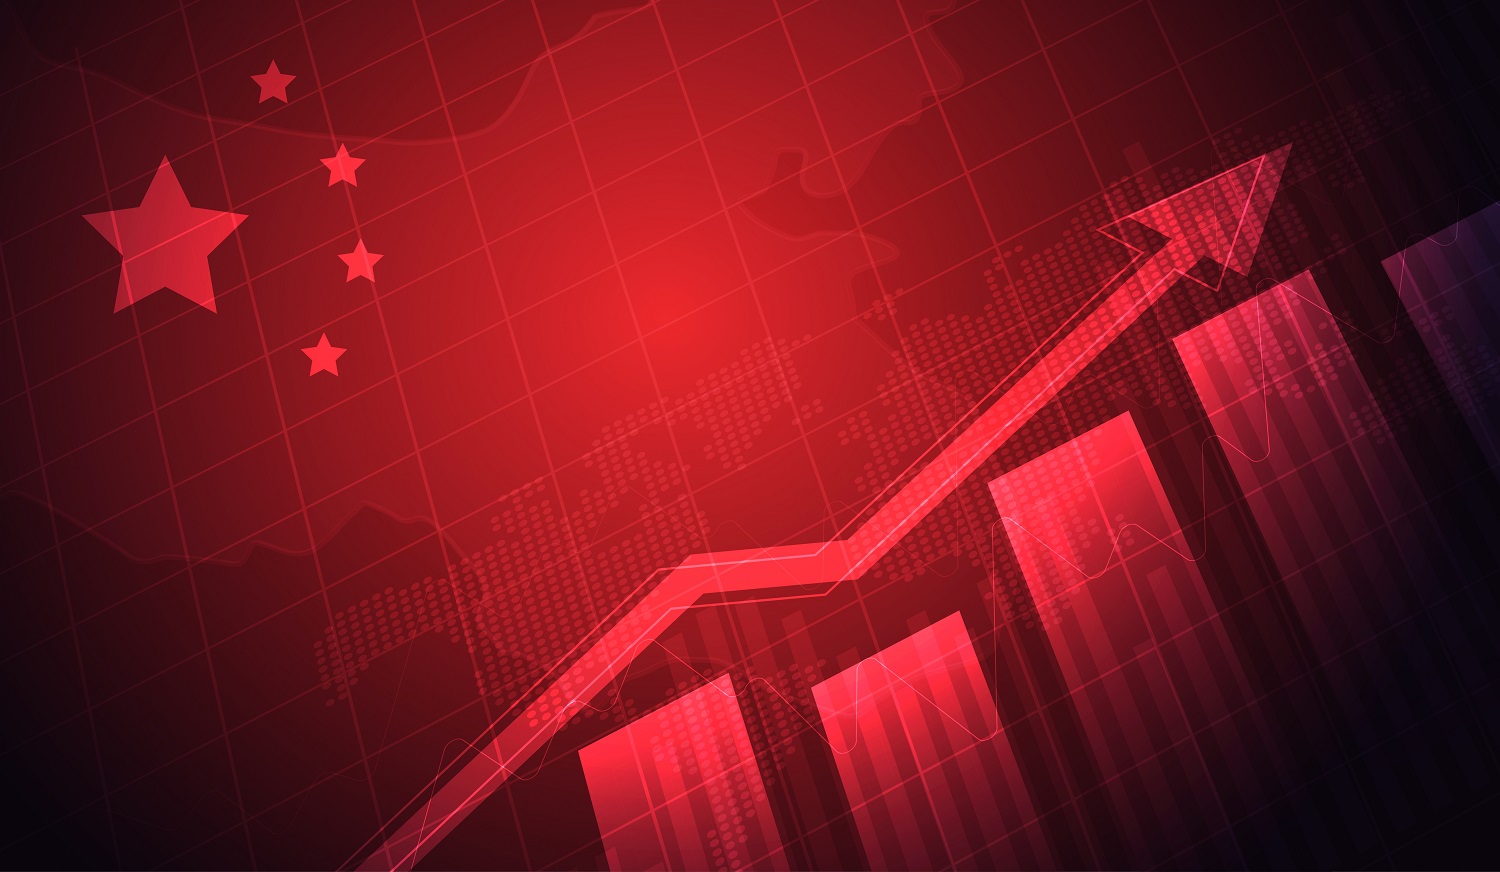 A digitized map of China, superimposed with an image of the Chinese flag and a candlestick-type stock market graph.